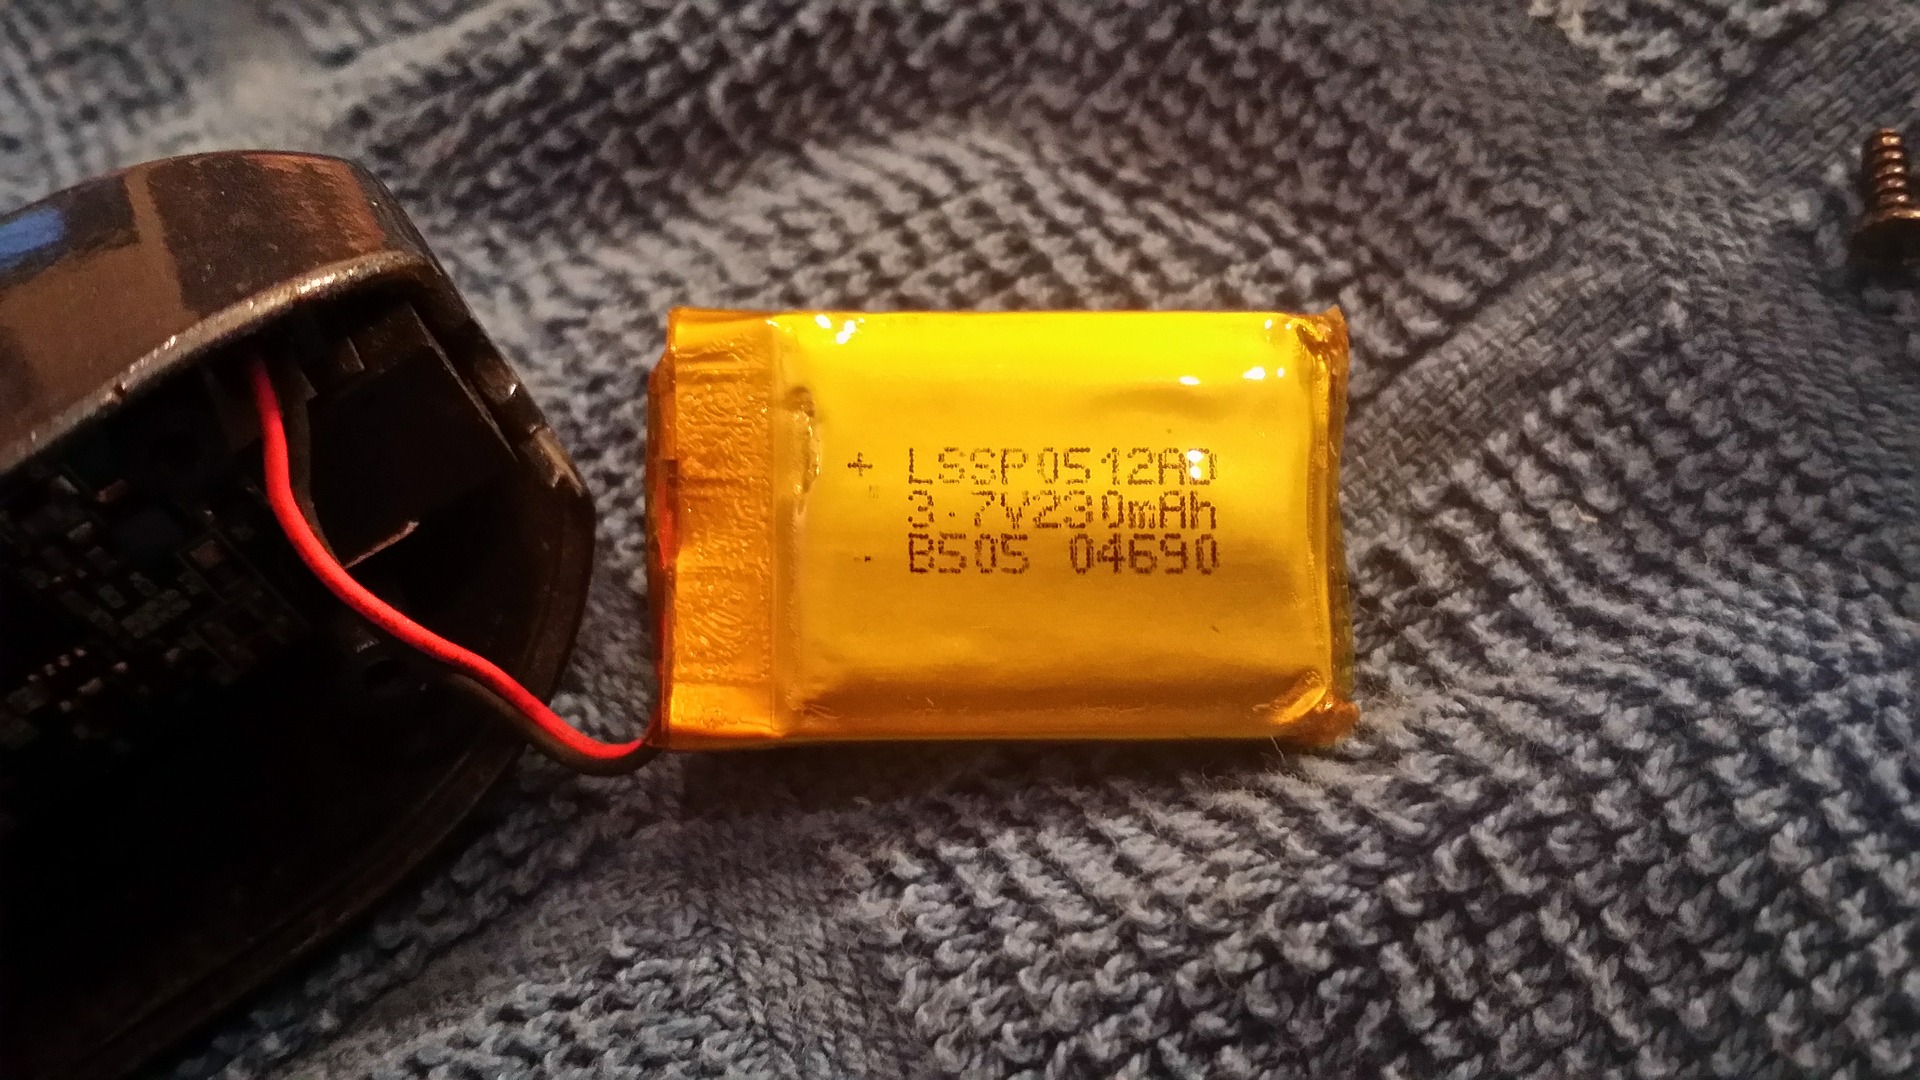 a yellow rectangular object with text on it